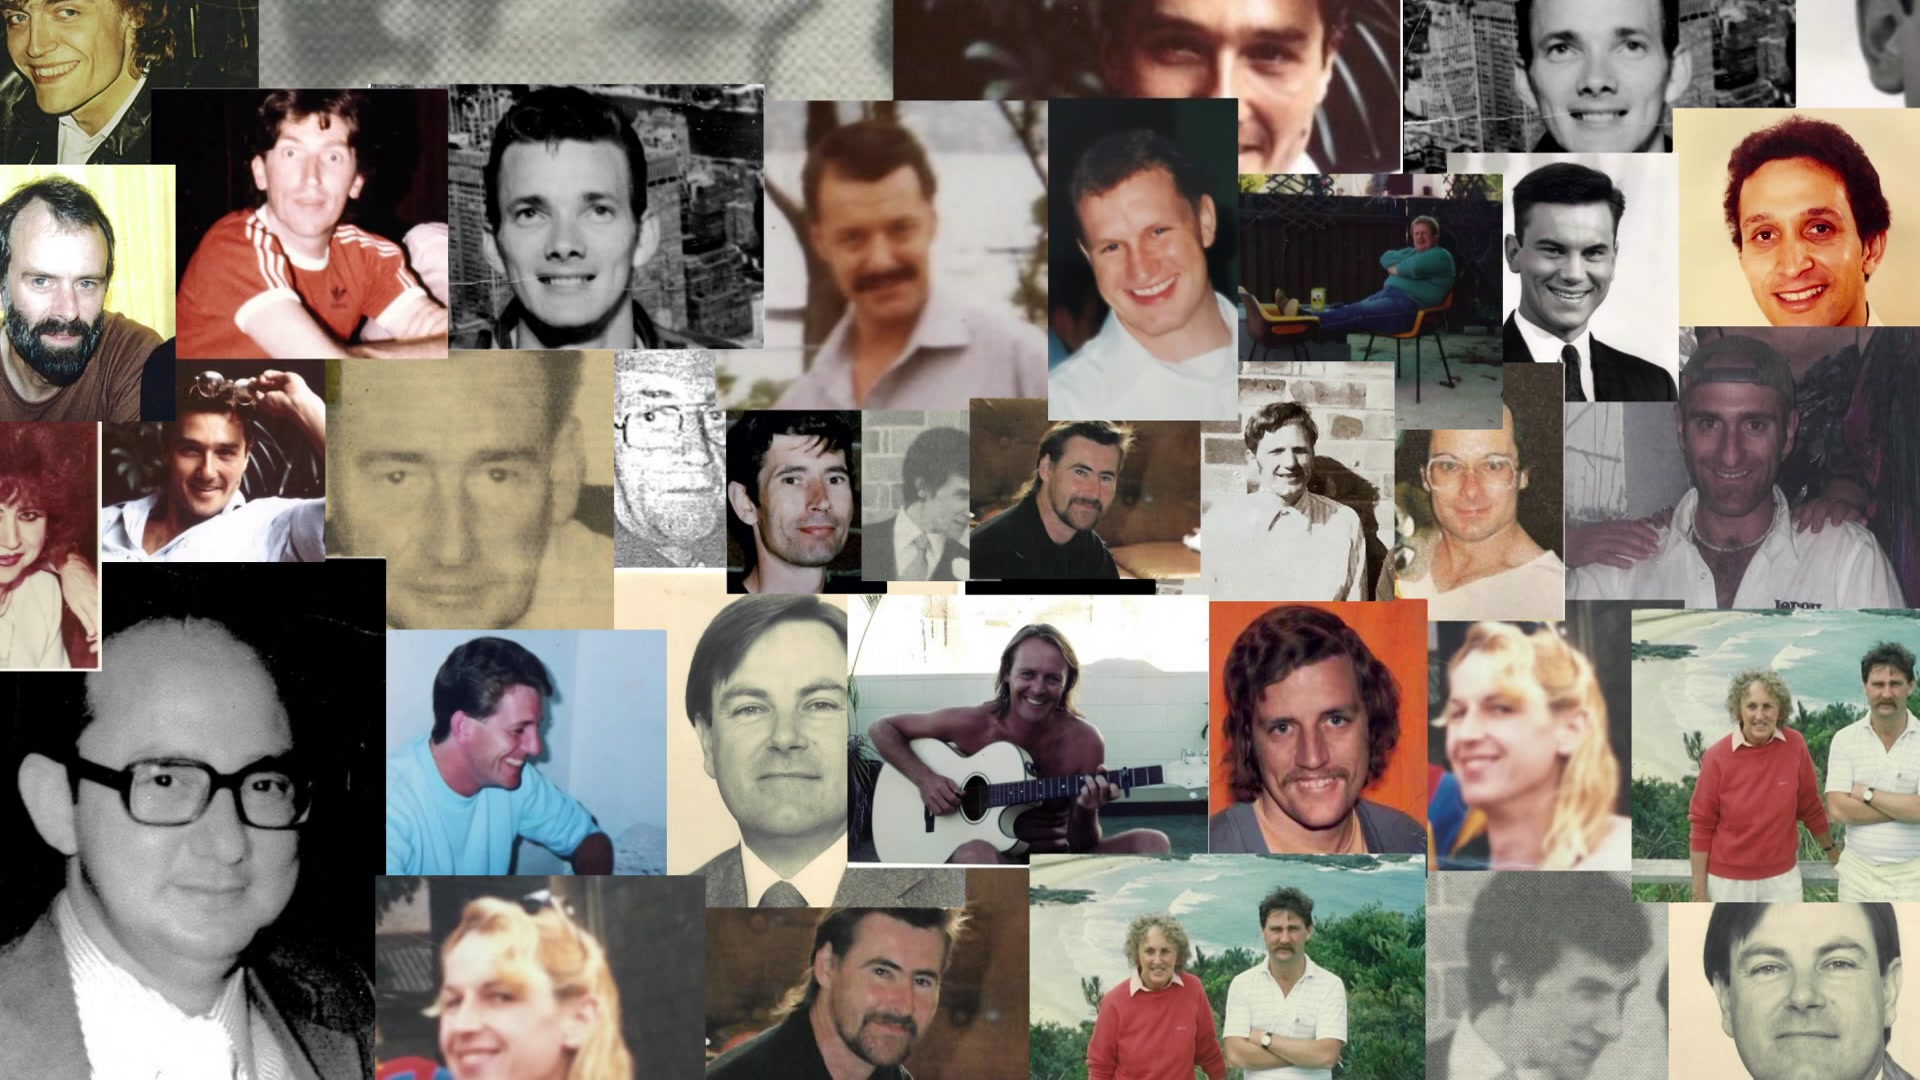 Collage of pictures of men whose deaths were investigated by the nsw gay hate inquiry